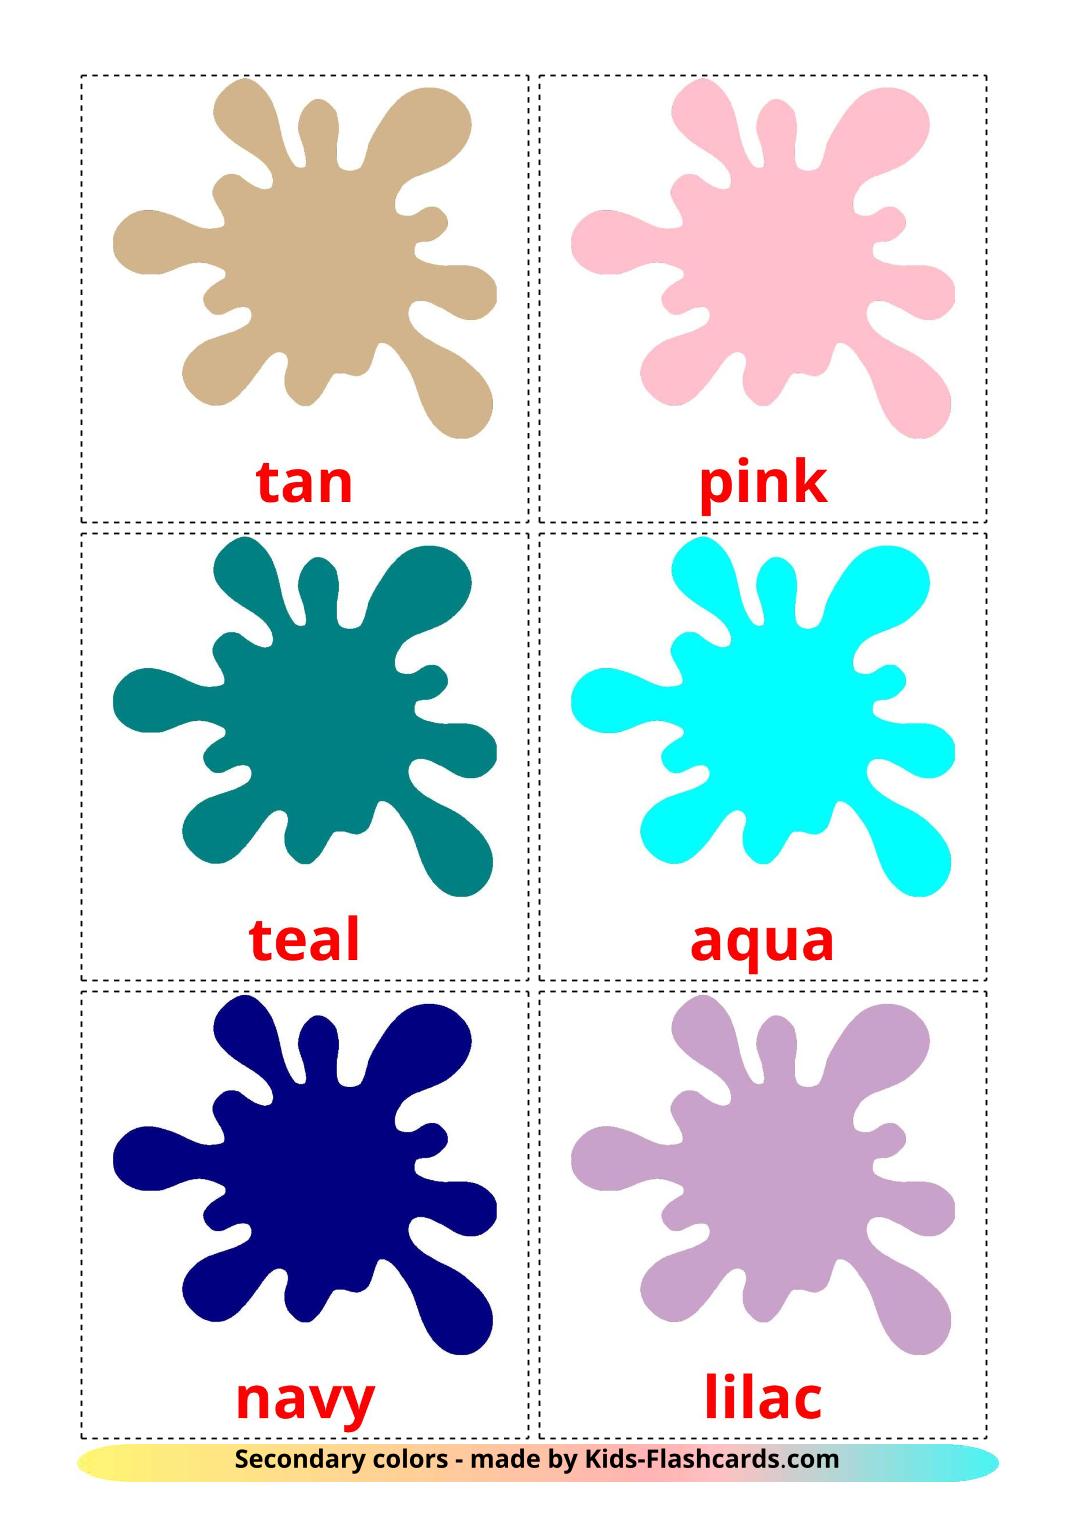 Secondary colors - 20 Free Printable english Flashcards 